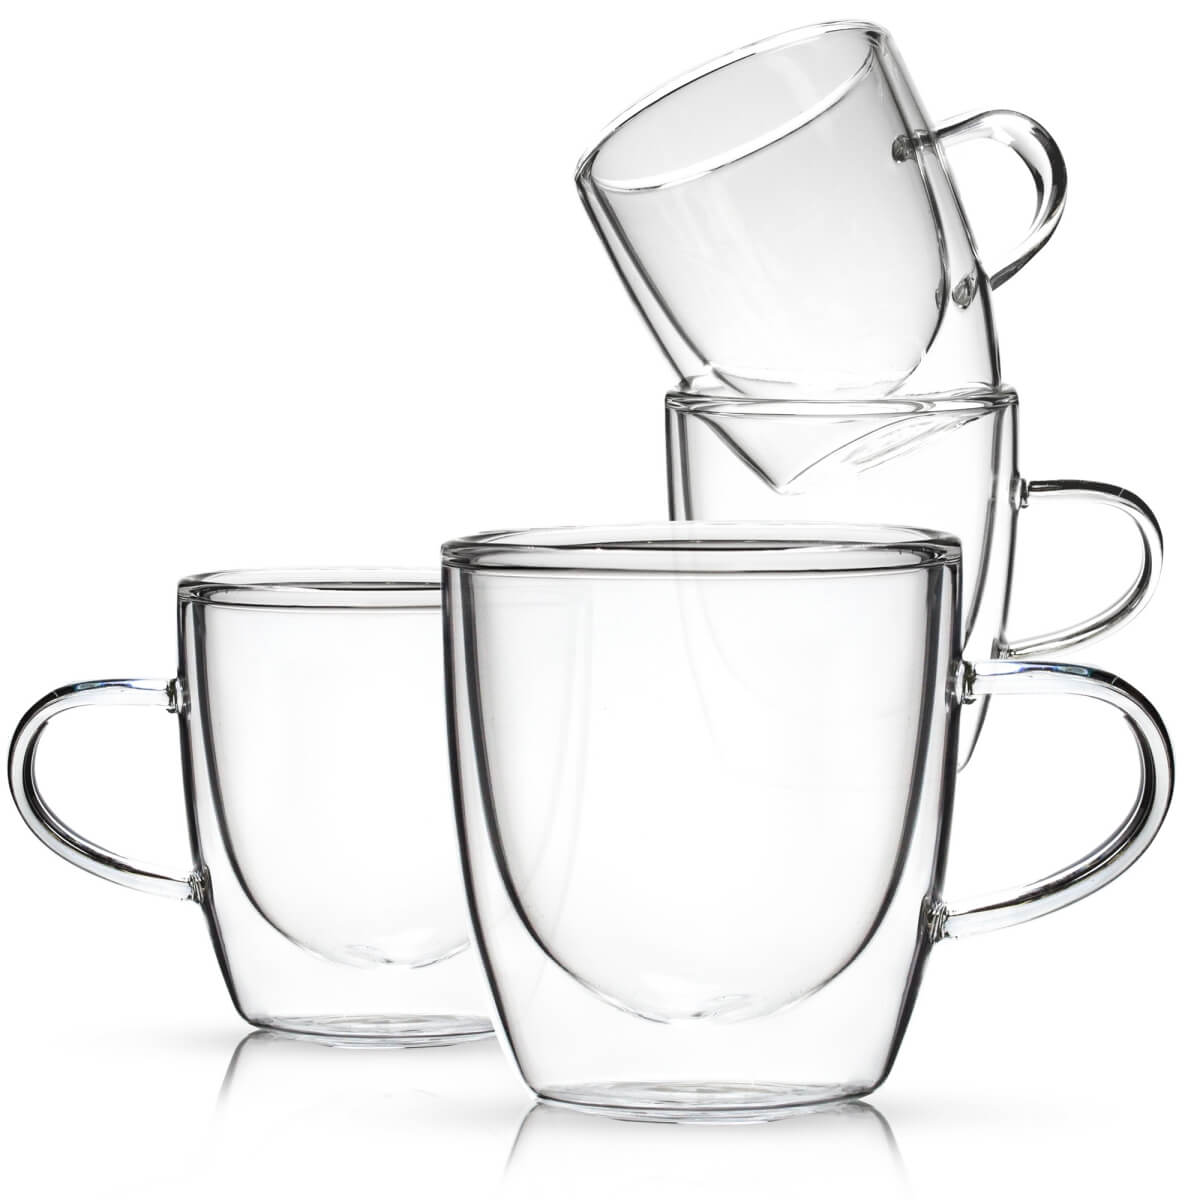 Kitchables Espresso Shot Glass, Durable Double Walled Espresso Cups, Clear  Shot Glasses for Coffee S…See more Kitchables Espresso Shot Glass, Durable